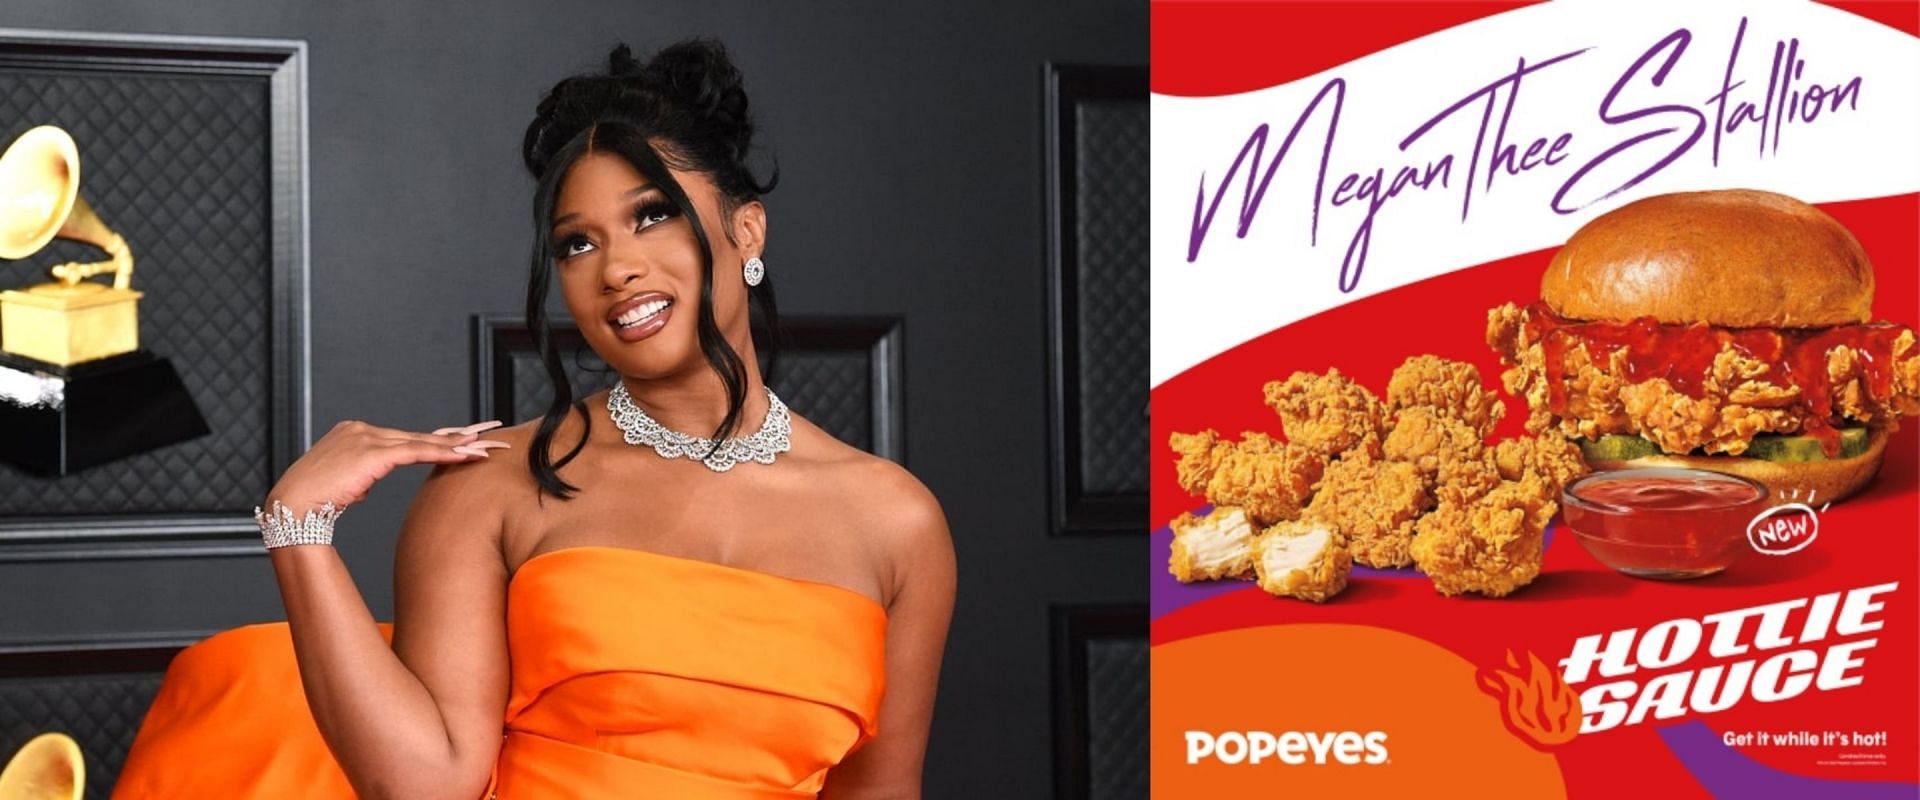 Popeyes x Megan Thee Stallion sandwich: Price, merch, availability, and all  about the 'Hottie sauce' collab